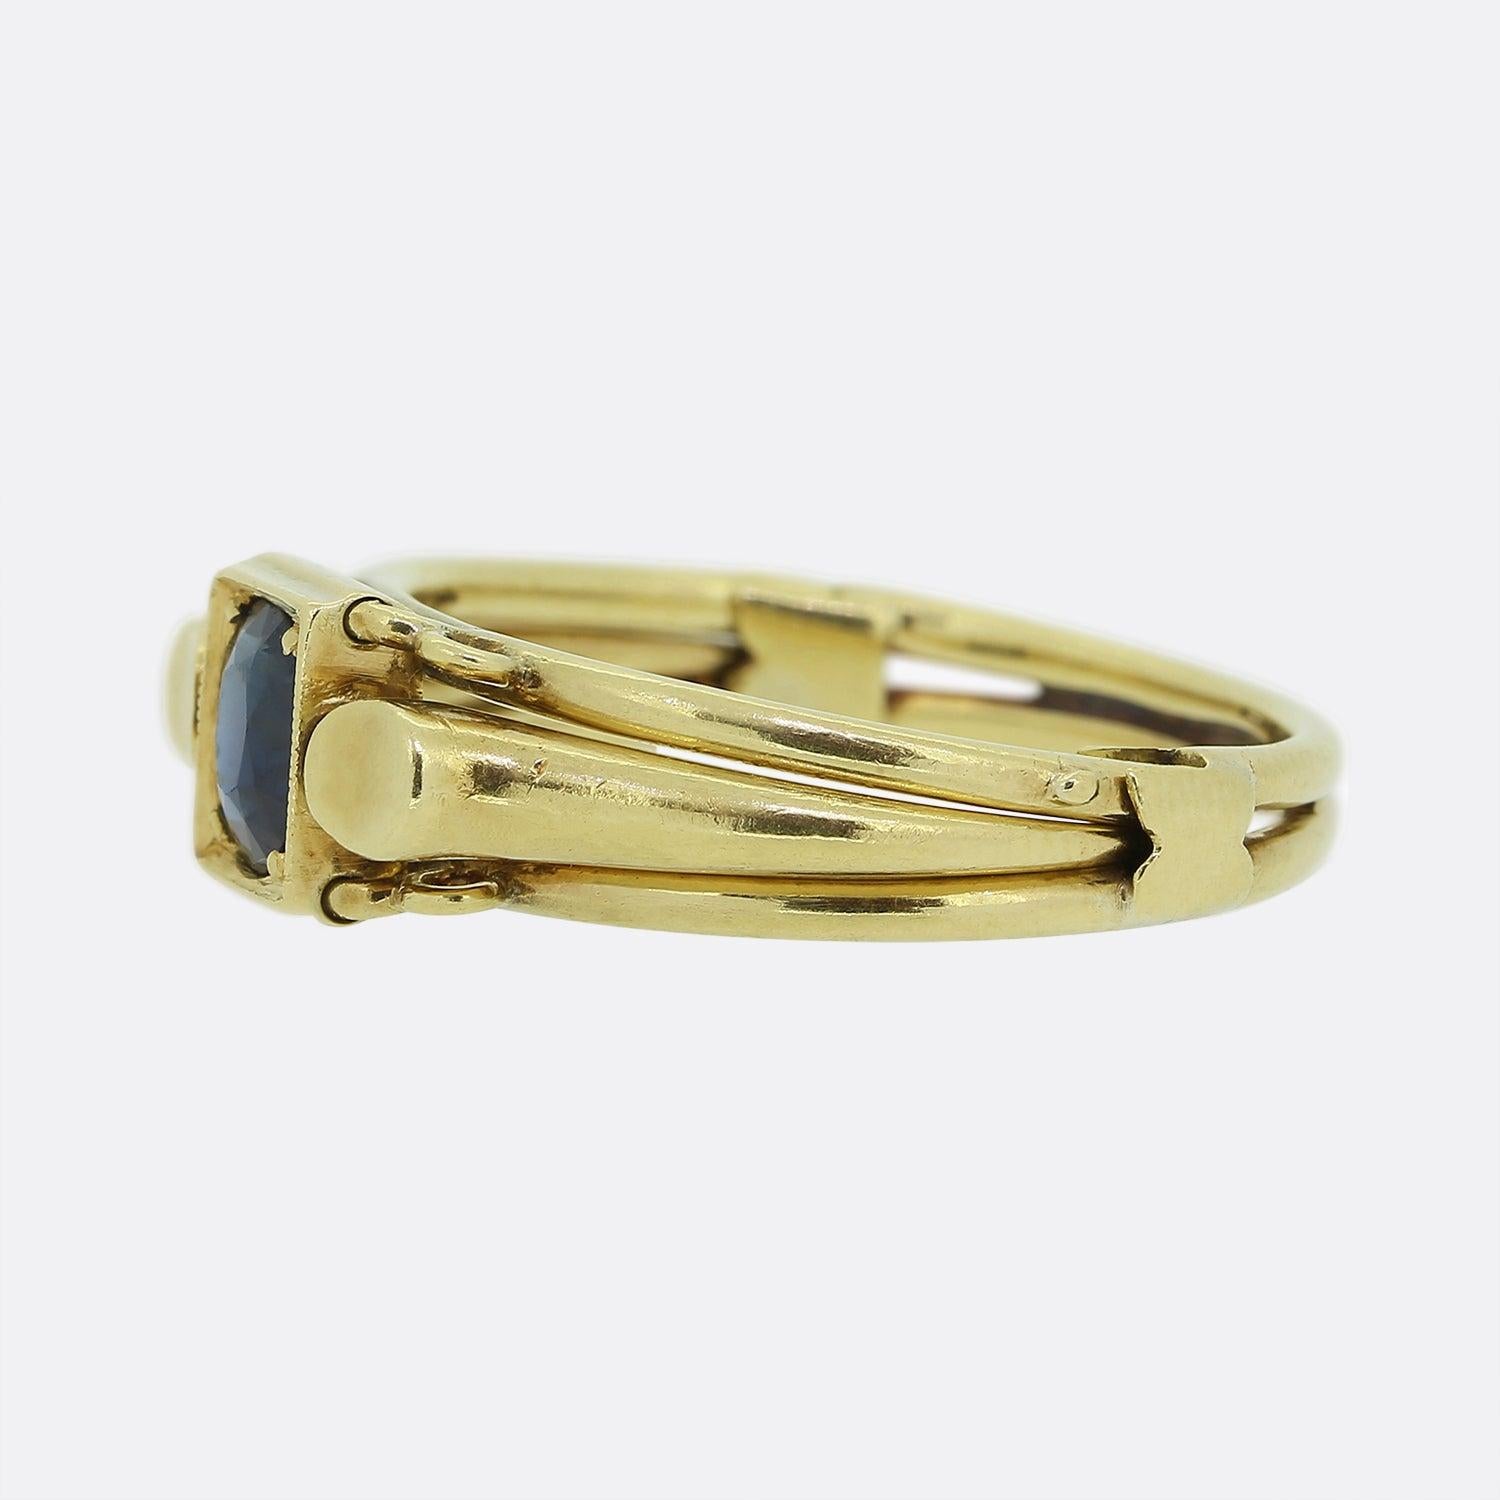 Here we have a sophisticated openable band ring which comes with a hinged closure giving it an eye-catching appeal. A single oval shaped sapphire possessing rich royal blue colour tone sits at the centre of the face in between a trio of yellow gold